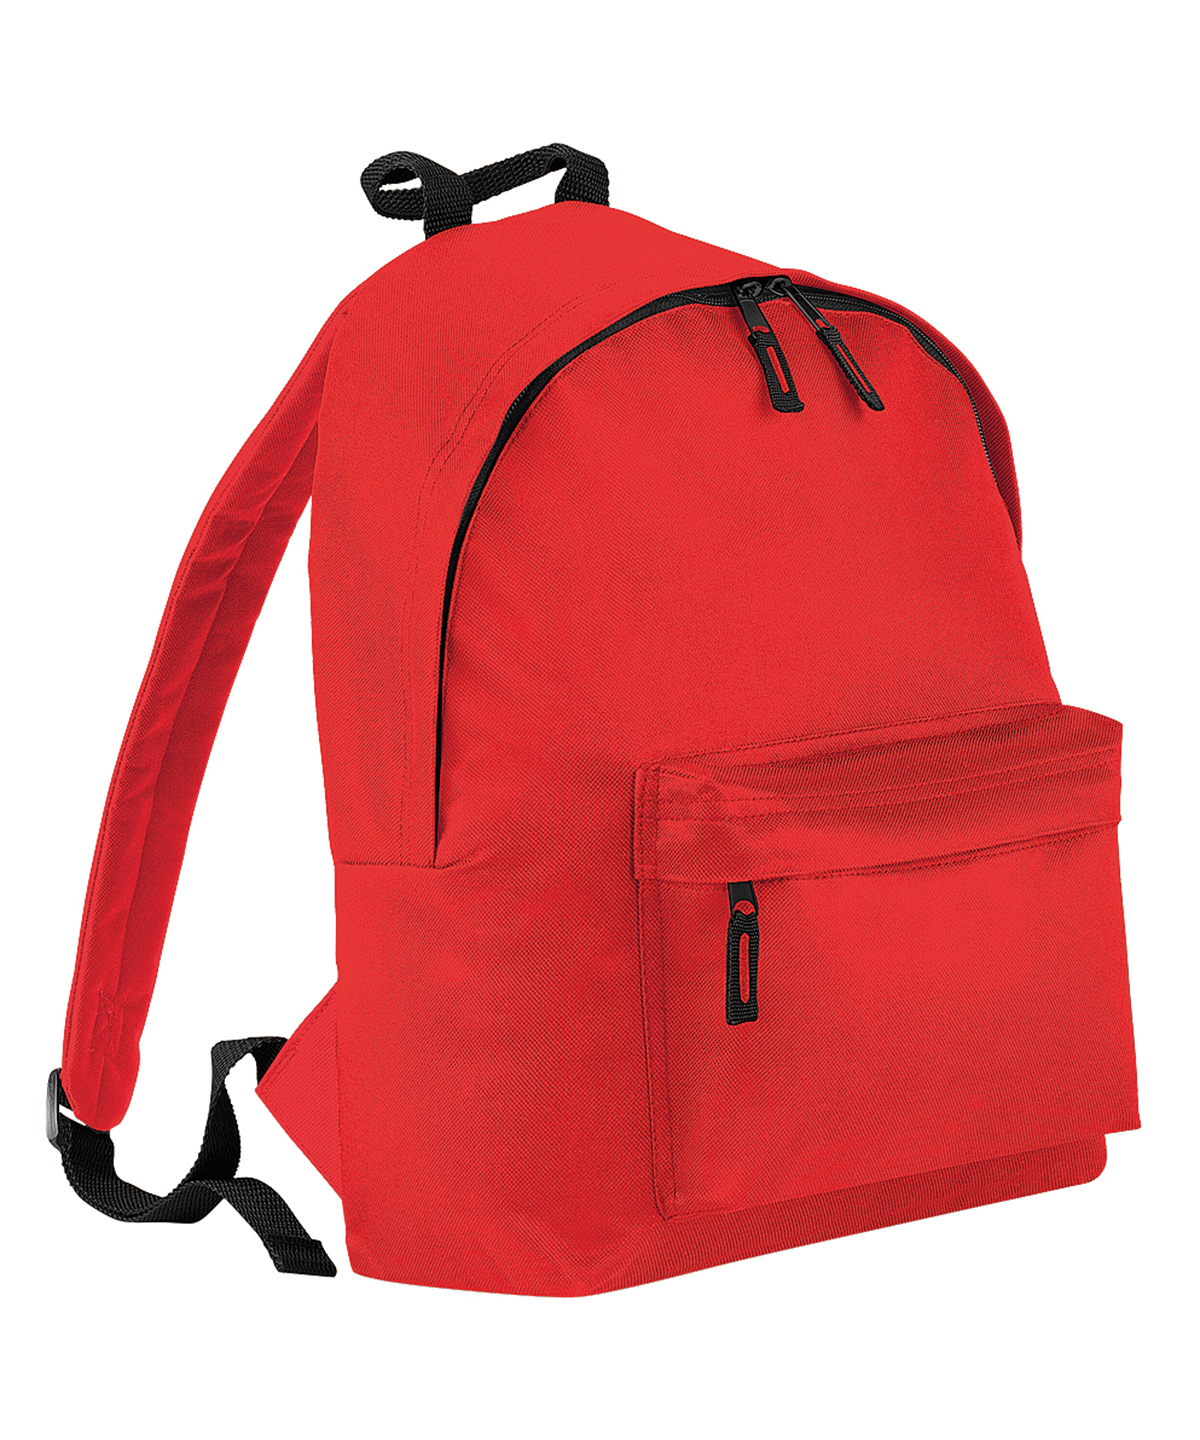 Junior Fashion Backpack Bright Red Size One Size